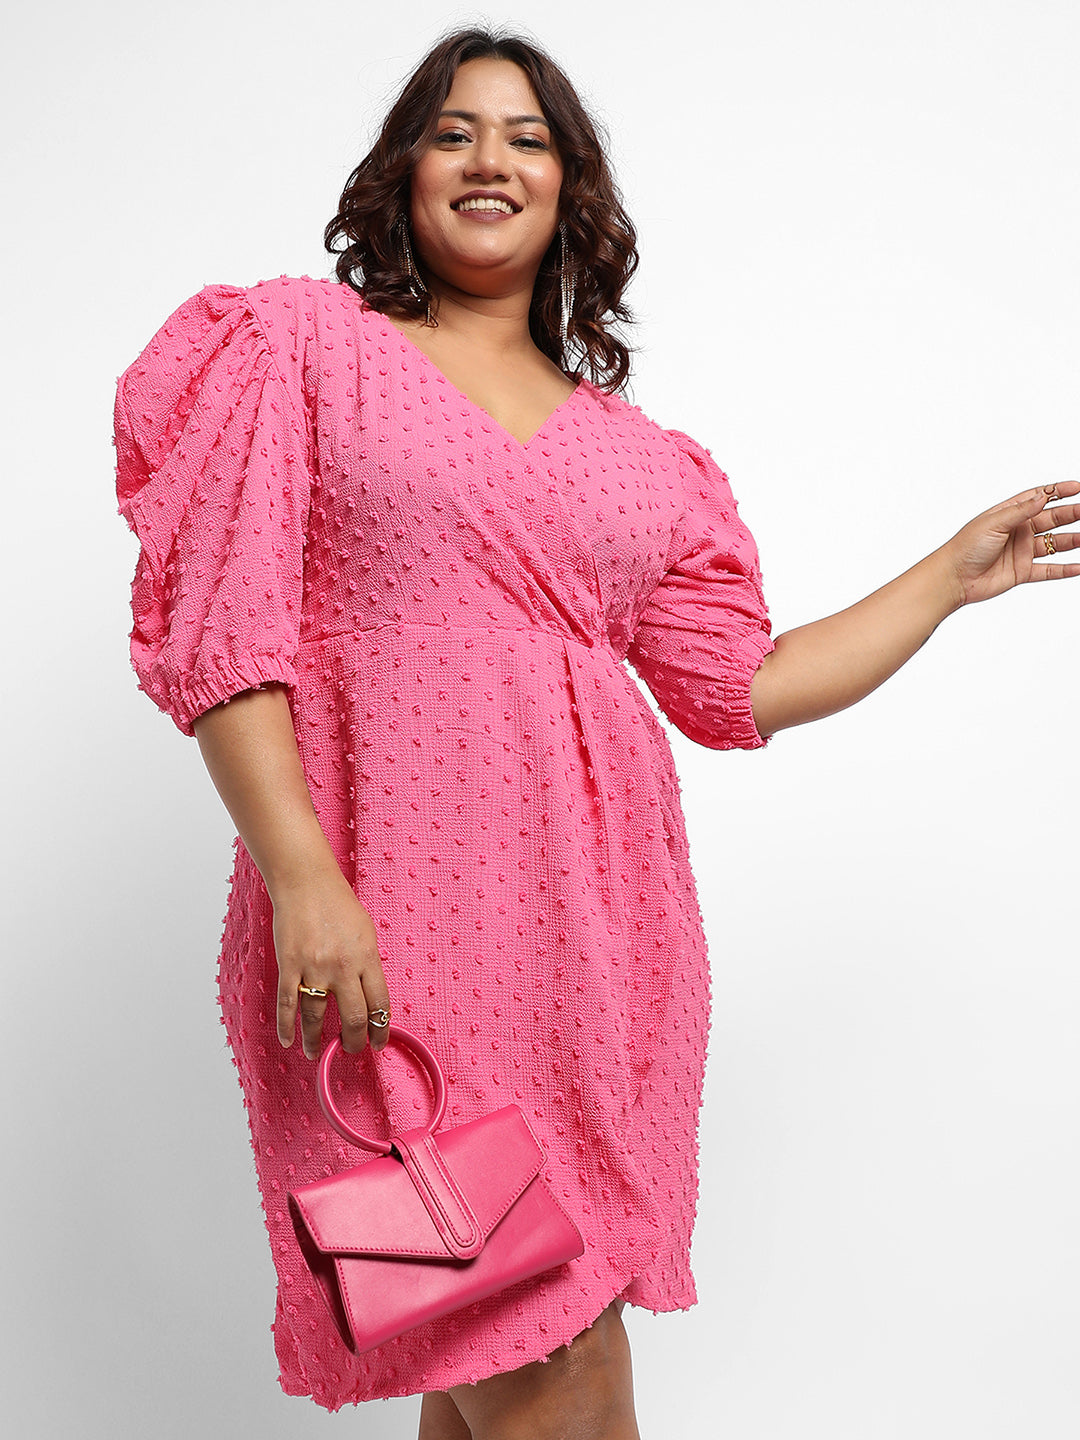 Plus Size Clothing for Women: 3XL to 6XL [Up to 55% Off]